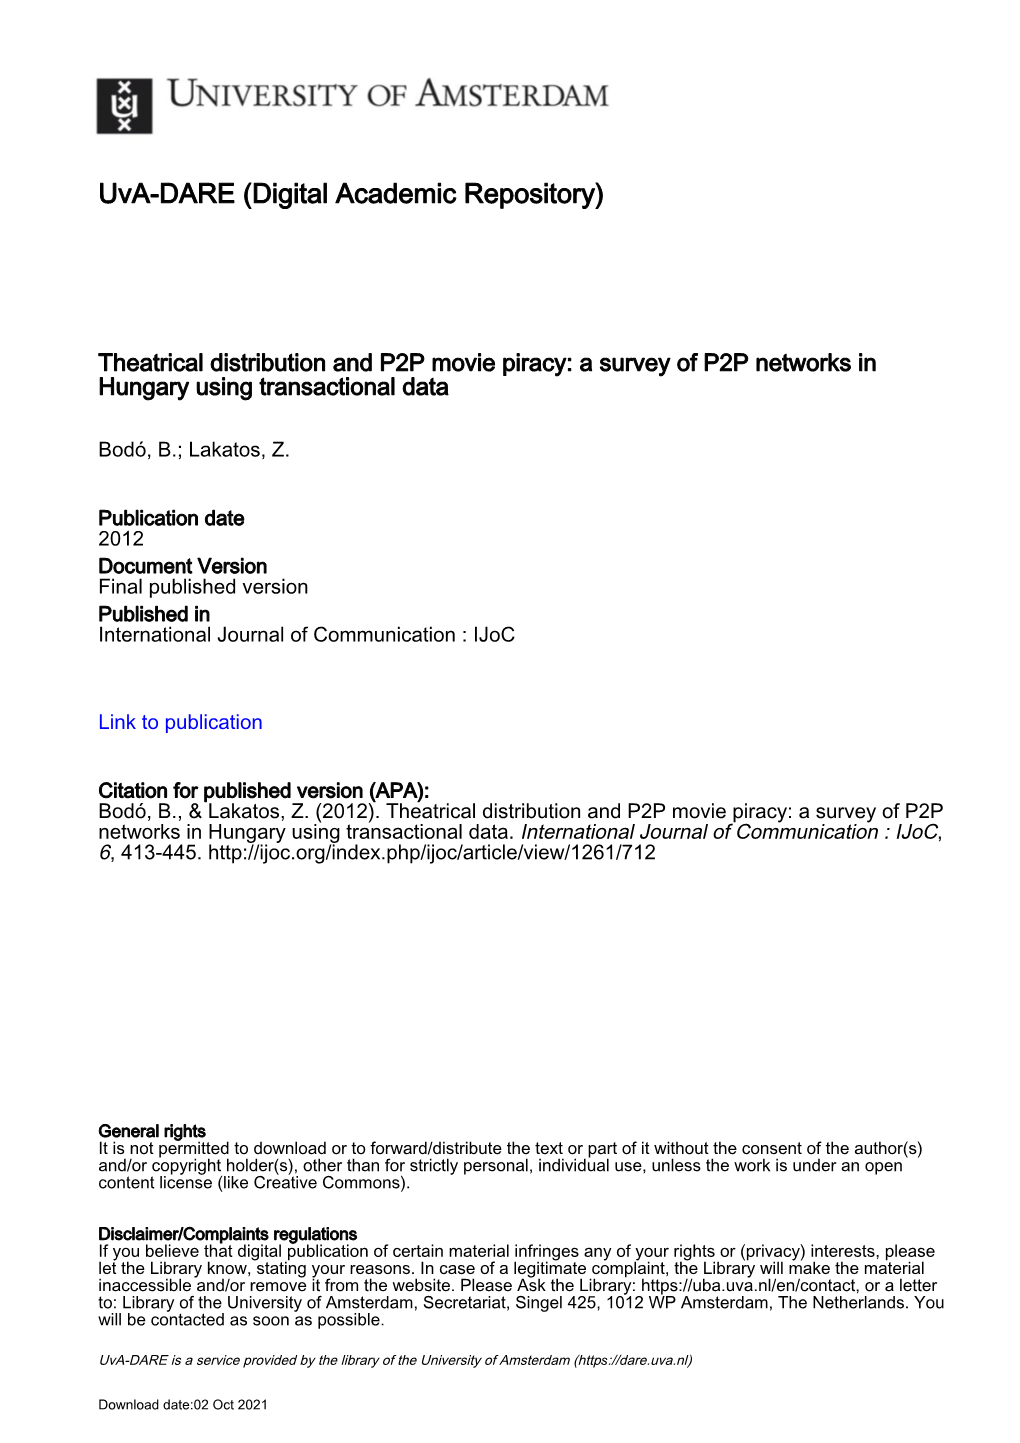 Theatrical Distribution and P2P Movie Piracy: a Survey of P2P Networks in Hungary Using Transactional Data